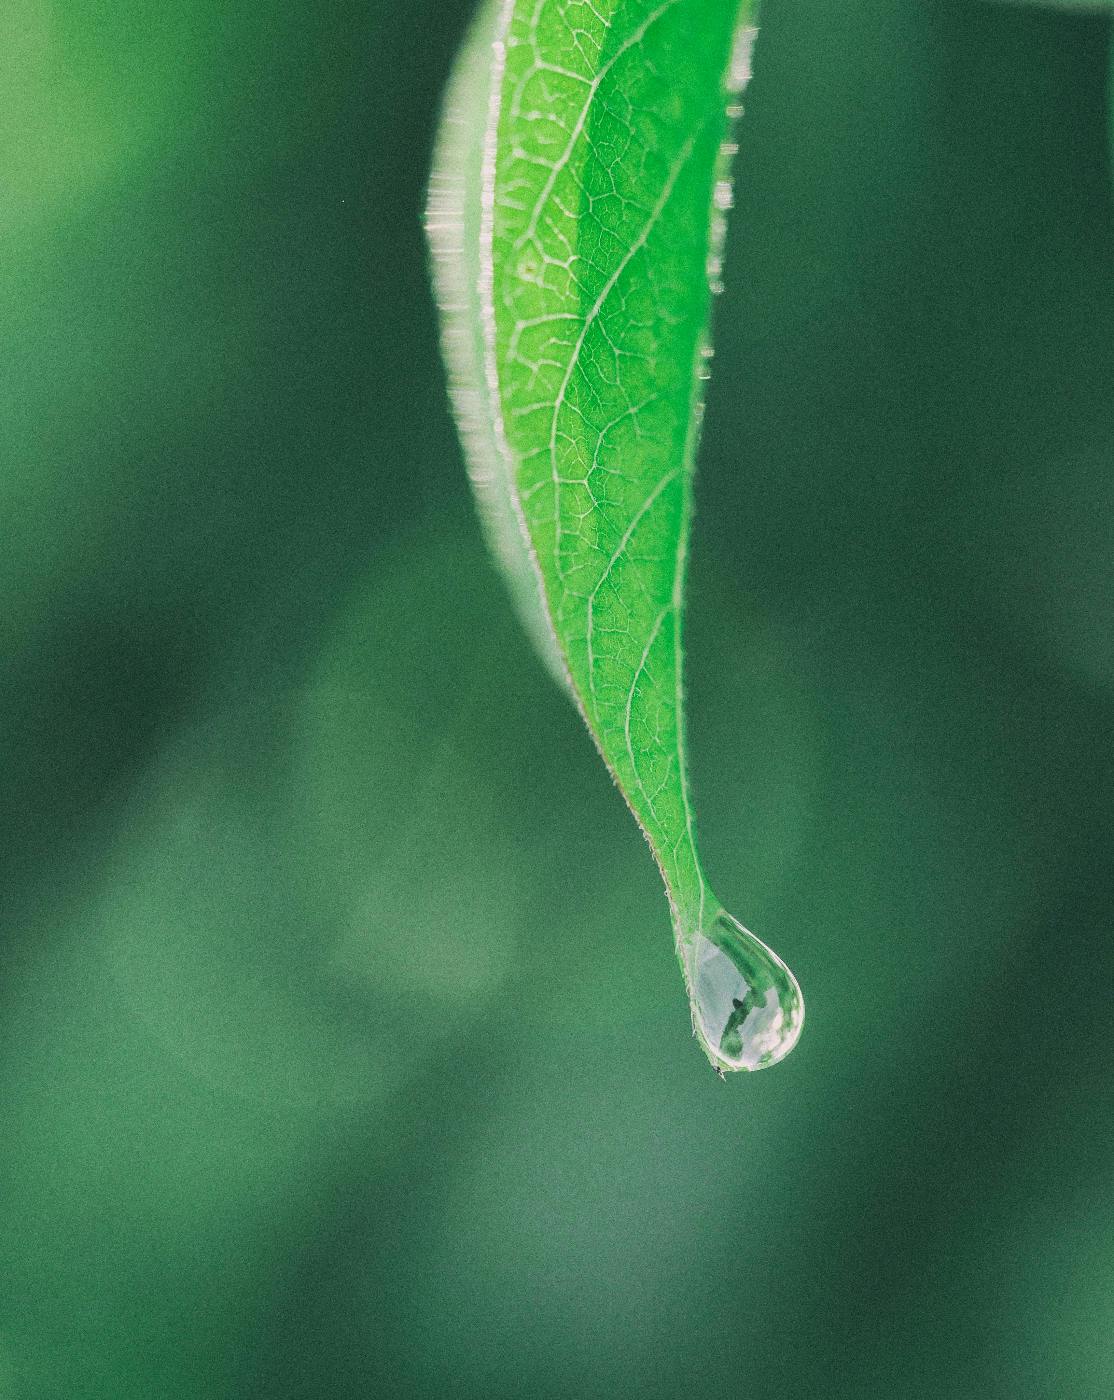 A drop of water hanging on to the bottom edge of a leaf